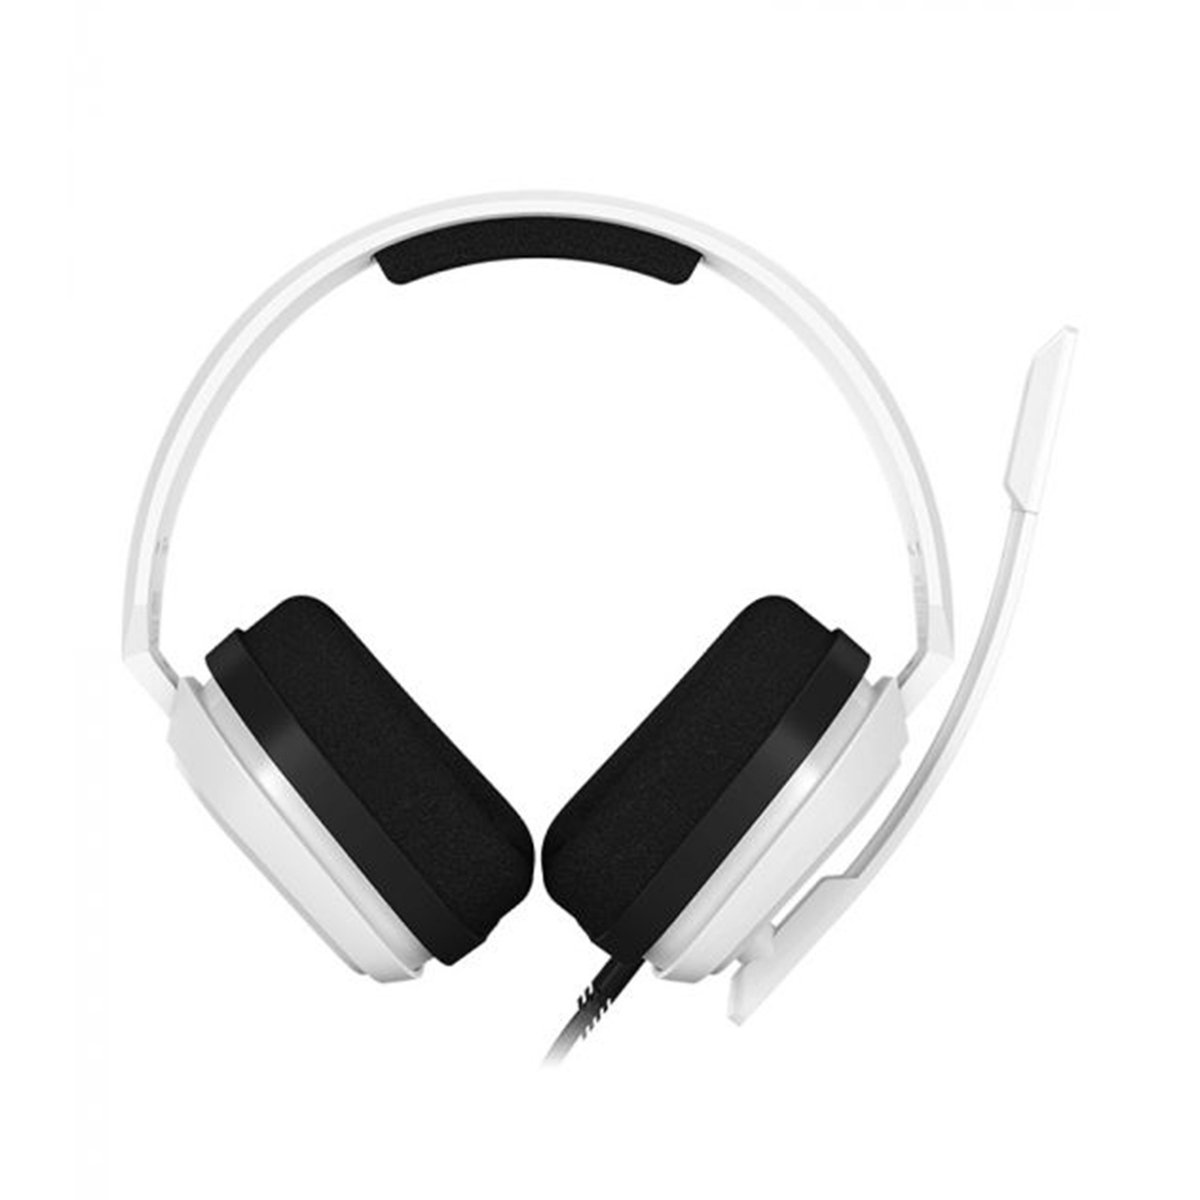 Astro A10 White Gaming Headset 3.5 MM - PS4, PS5